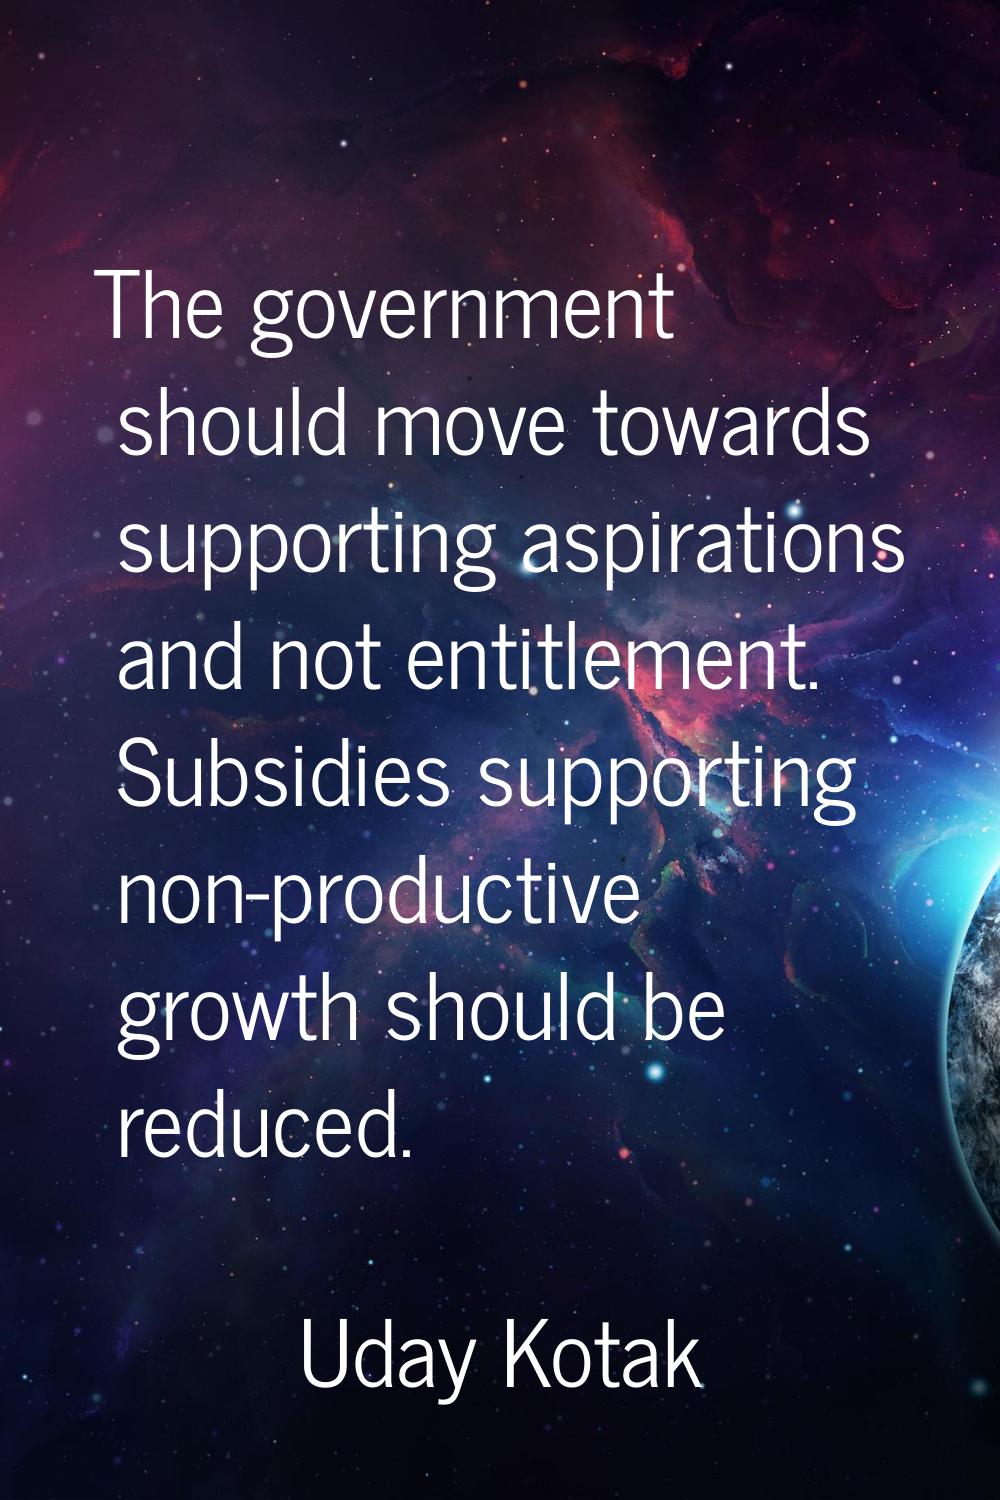 The government should move towards supporting aspirations and not entitlement. Subsidies supporting